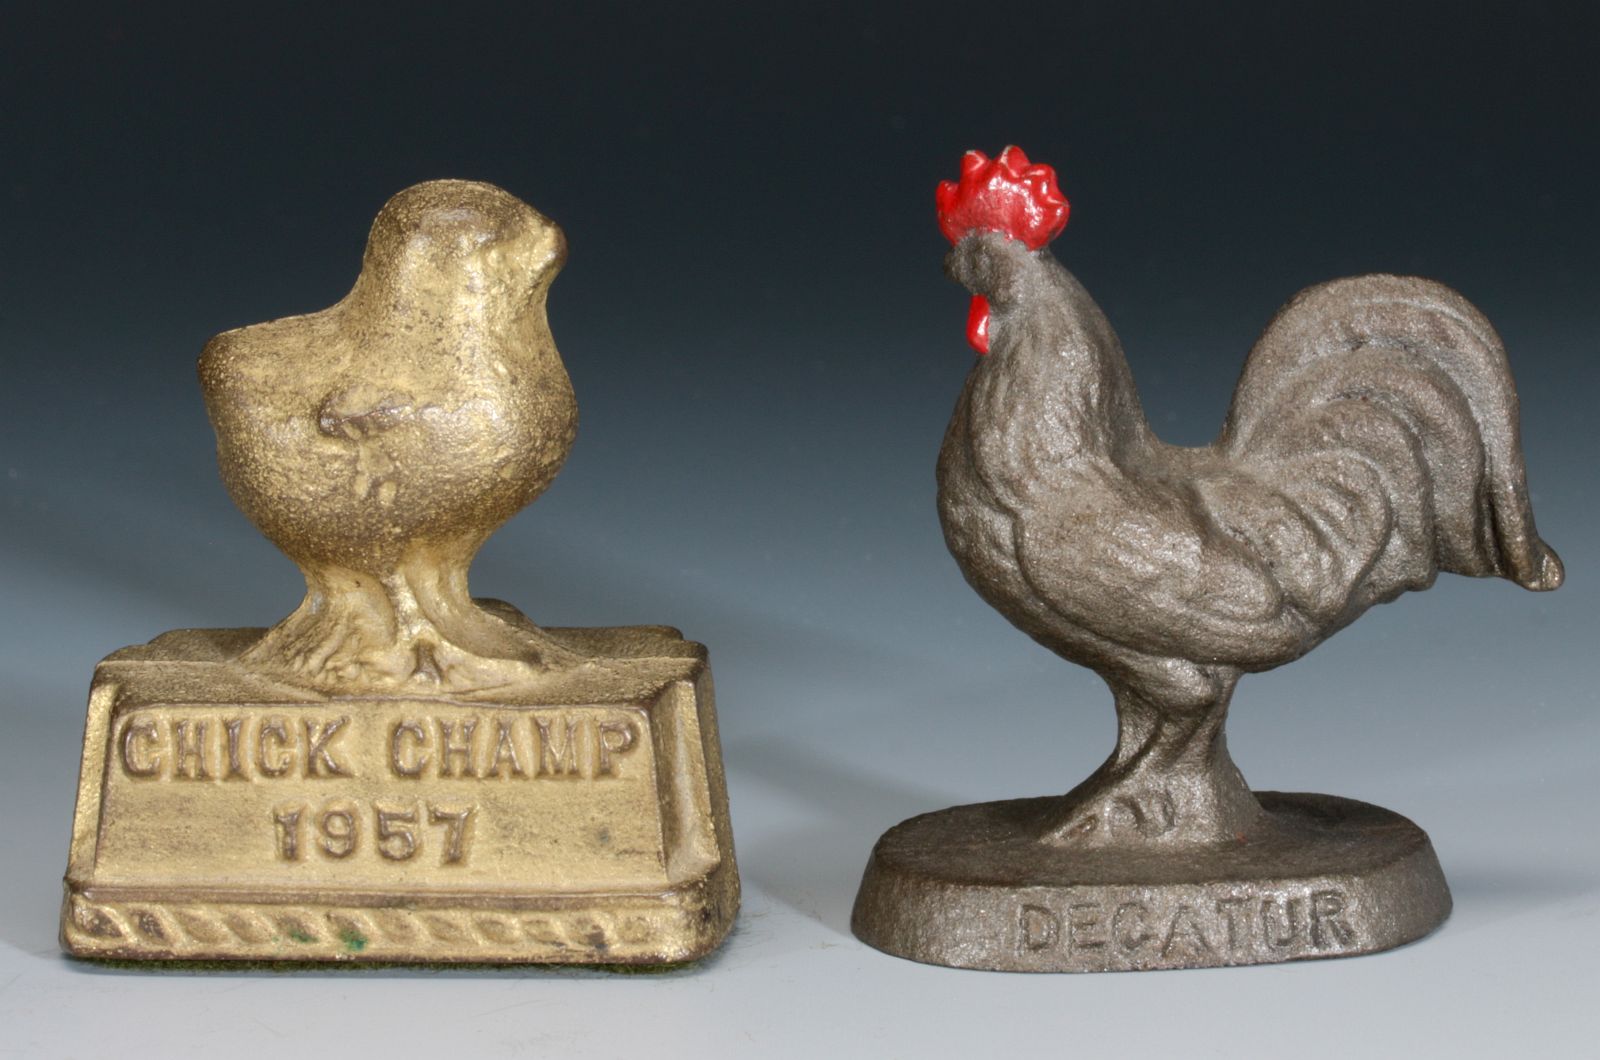 CHICK CHAMP AND DECATUR ROOSTER PAPERWEIGHTS